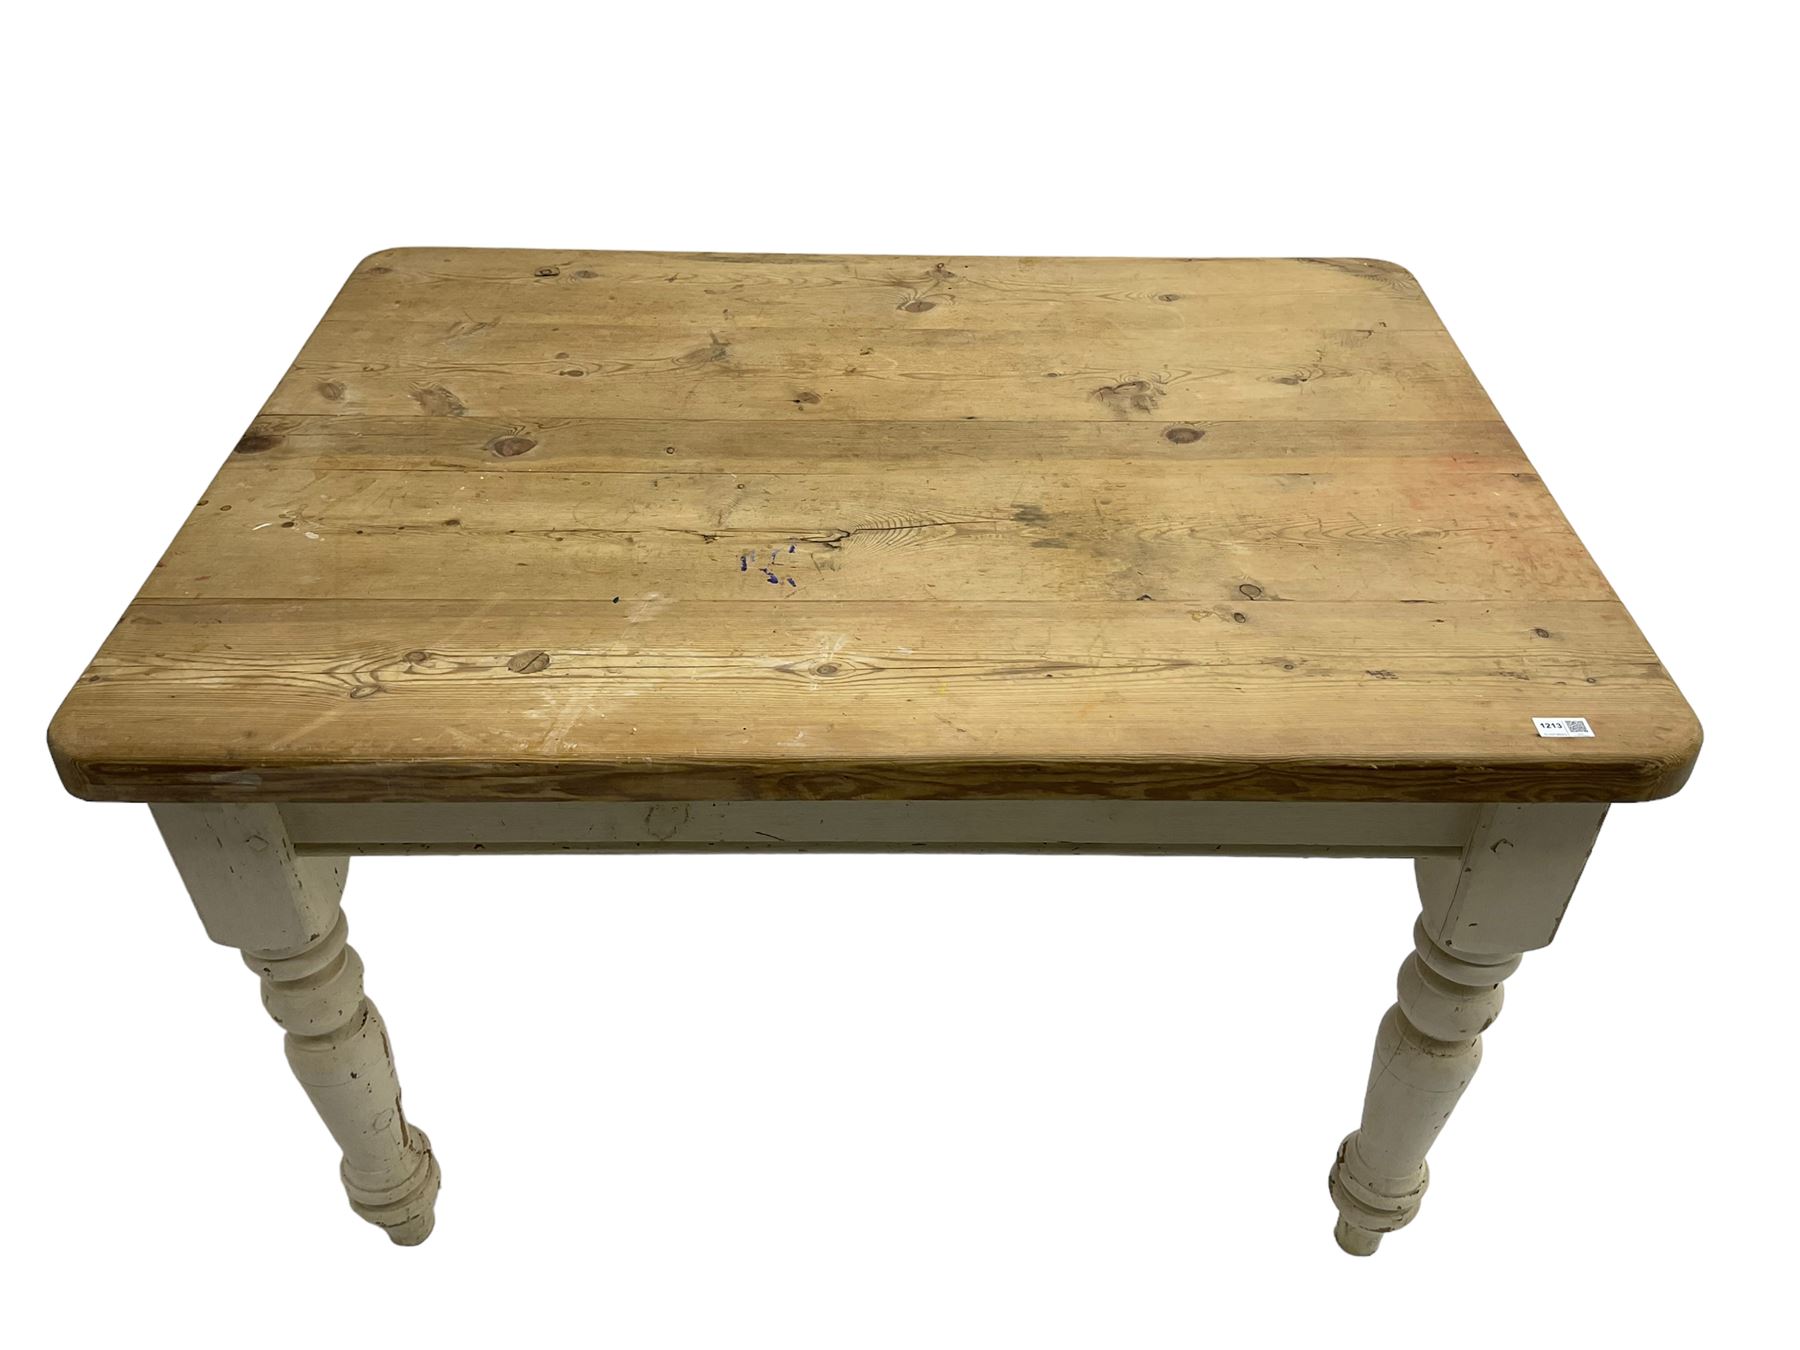 Traditional pine kitchen table with white painted base - Image 5 of 7